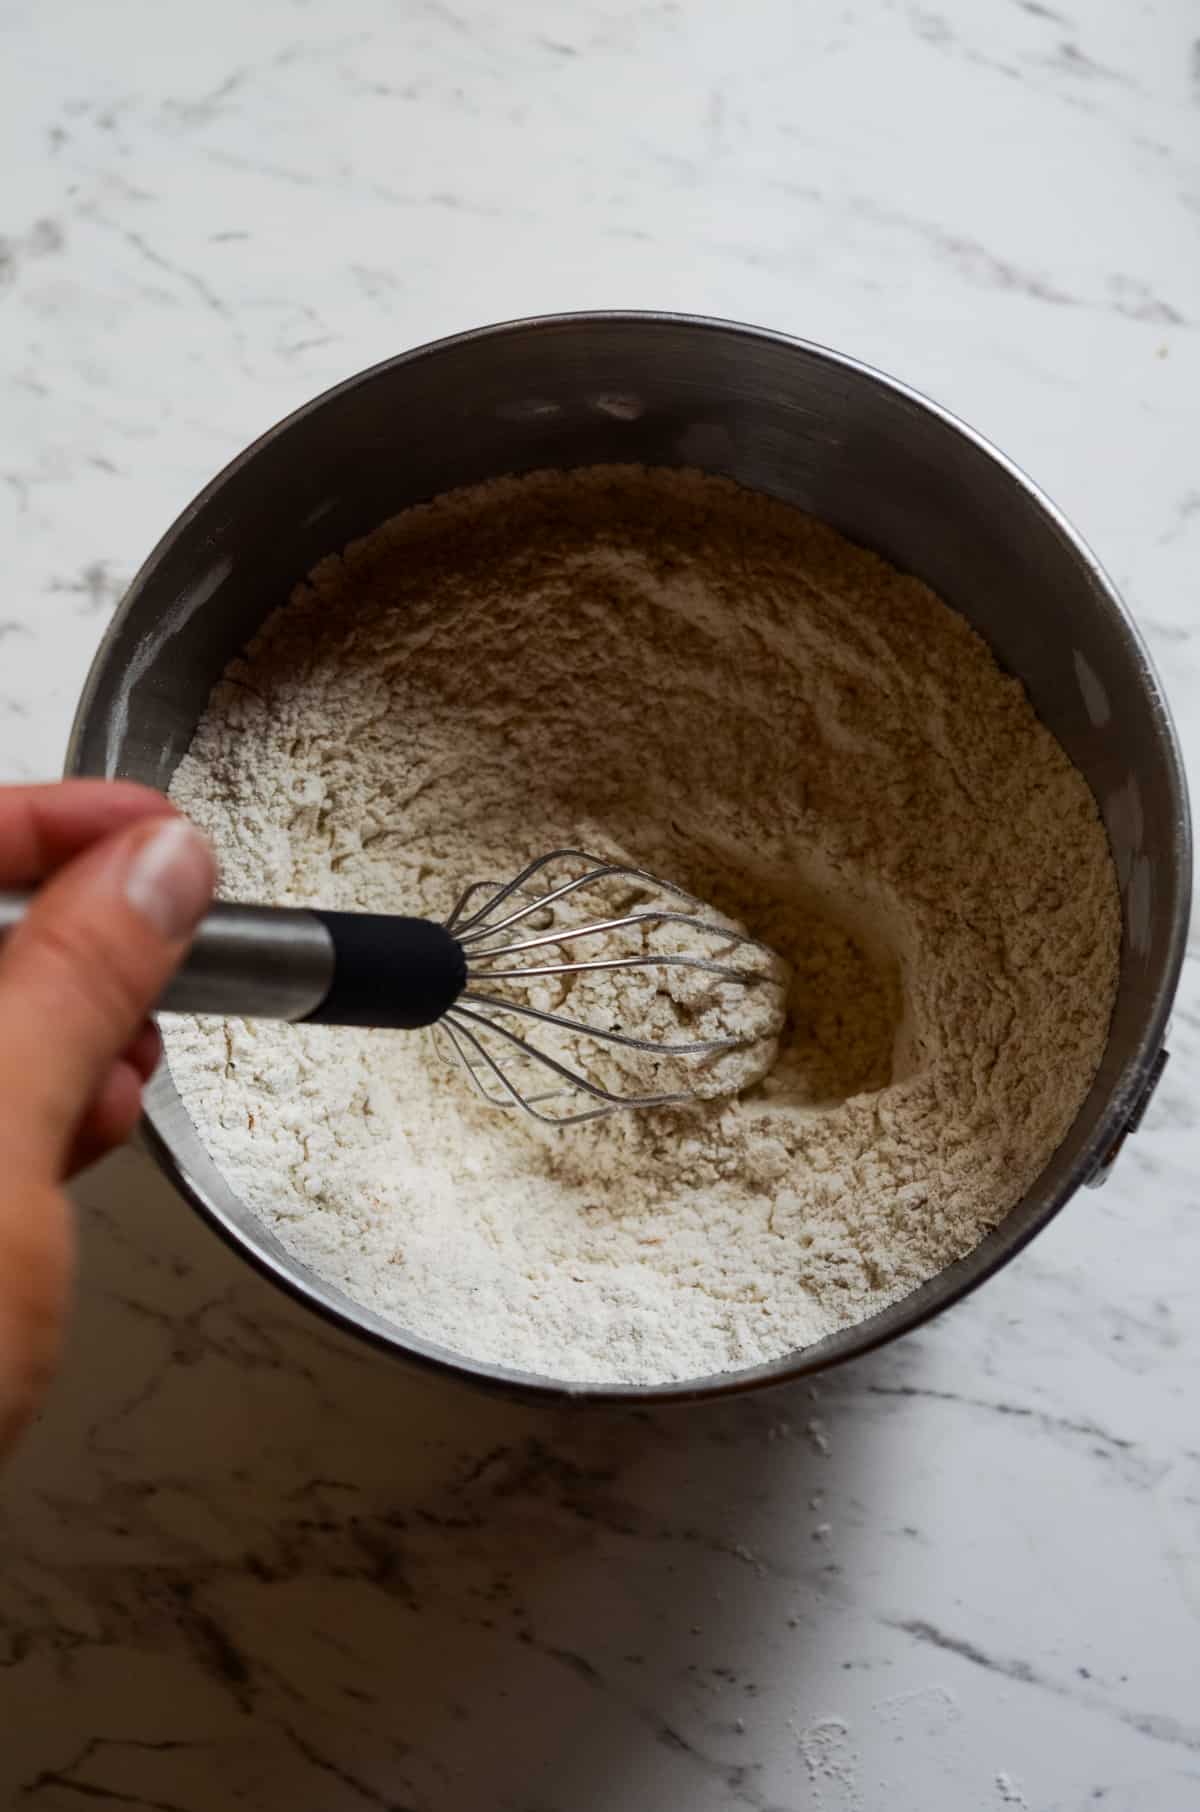 Whisking together flour and dry ingredients for muffins.